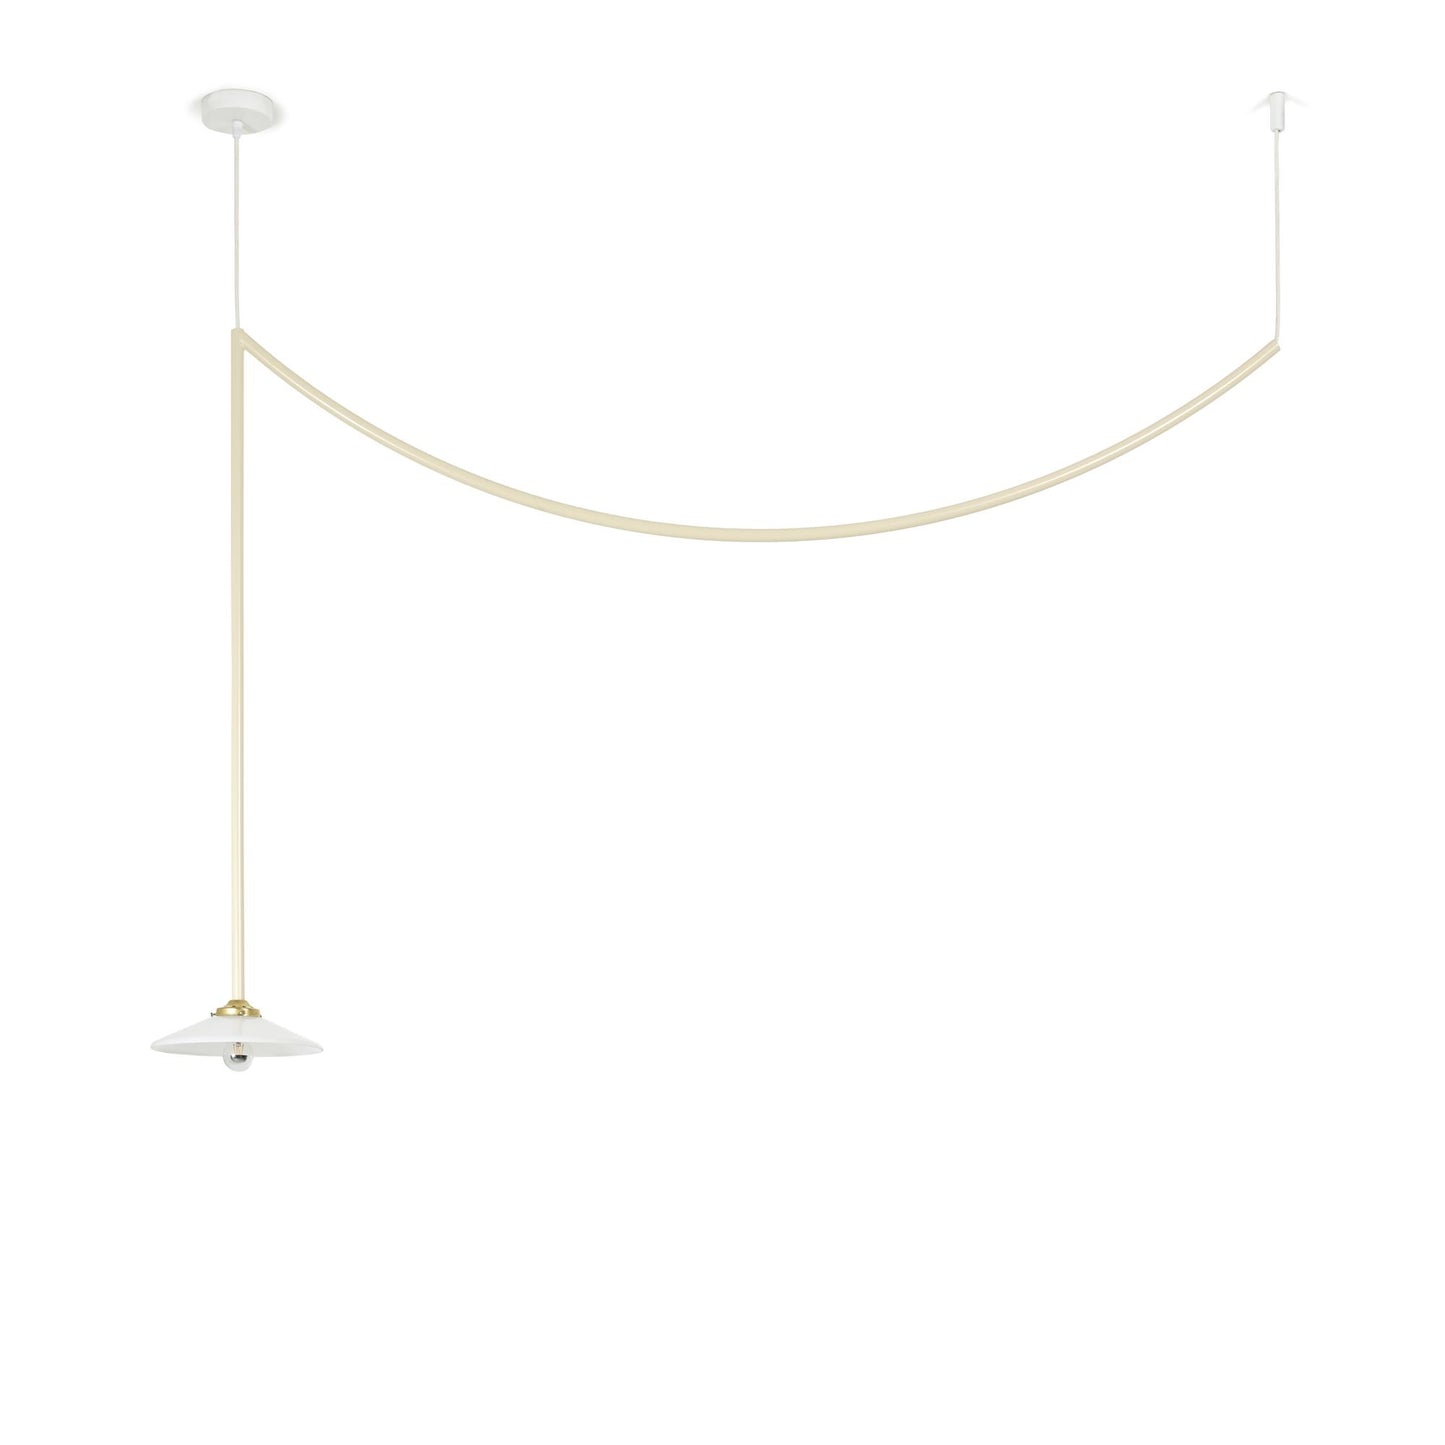 Ceiling Lamp N°4 Ceiling Light by Valerie Objects #Beige